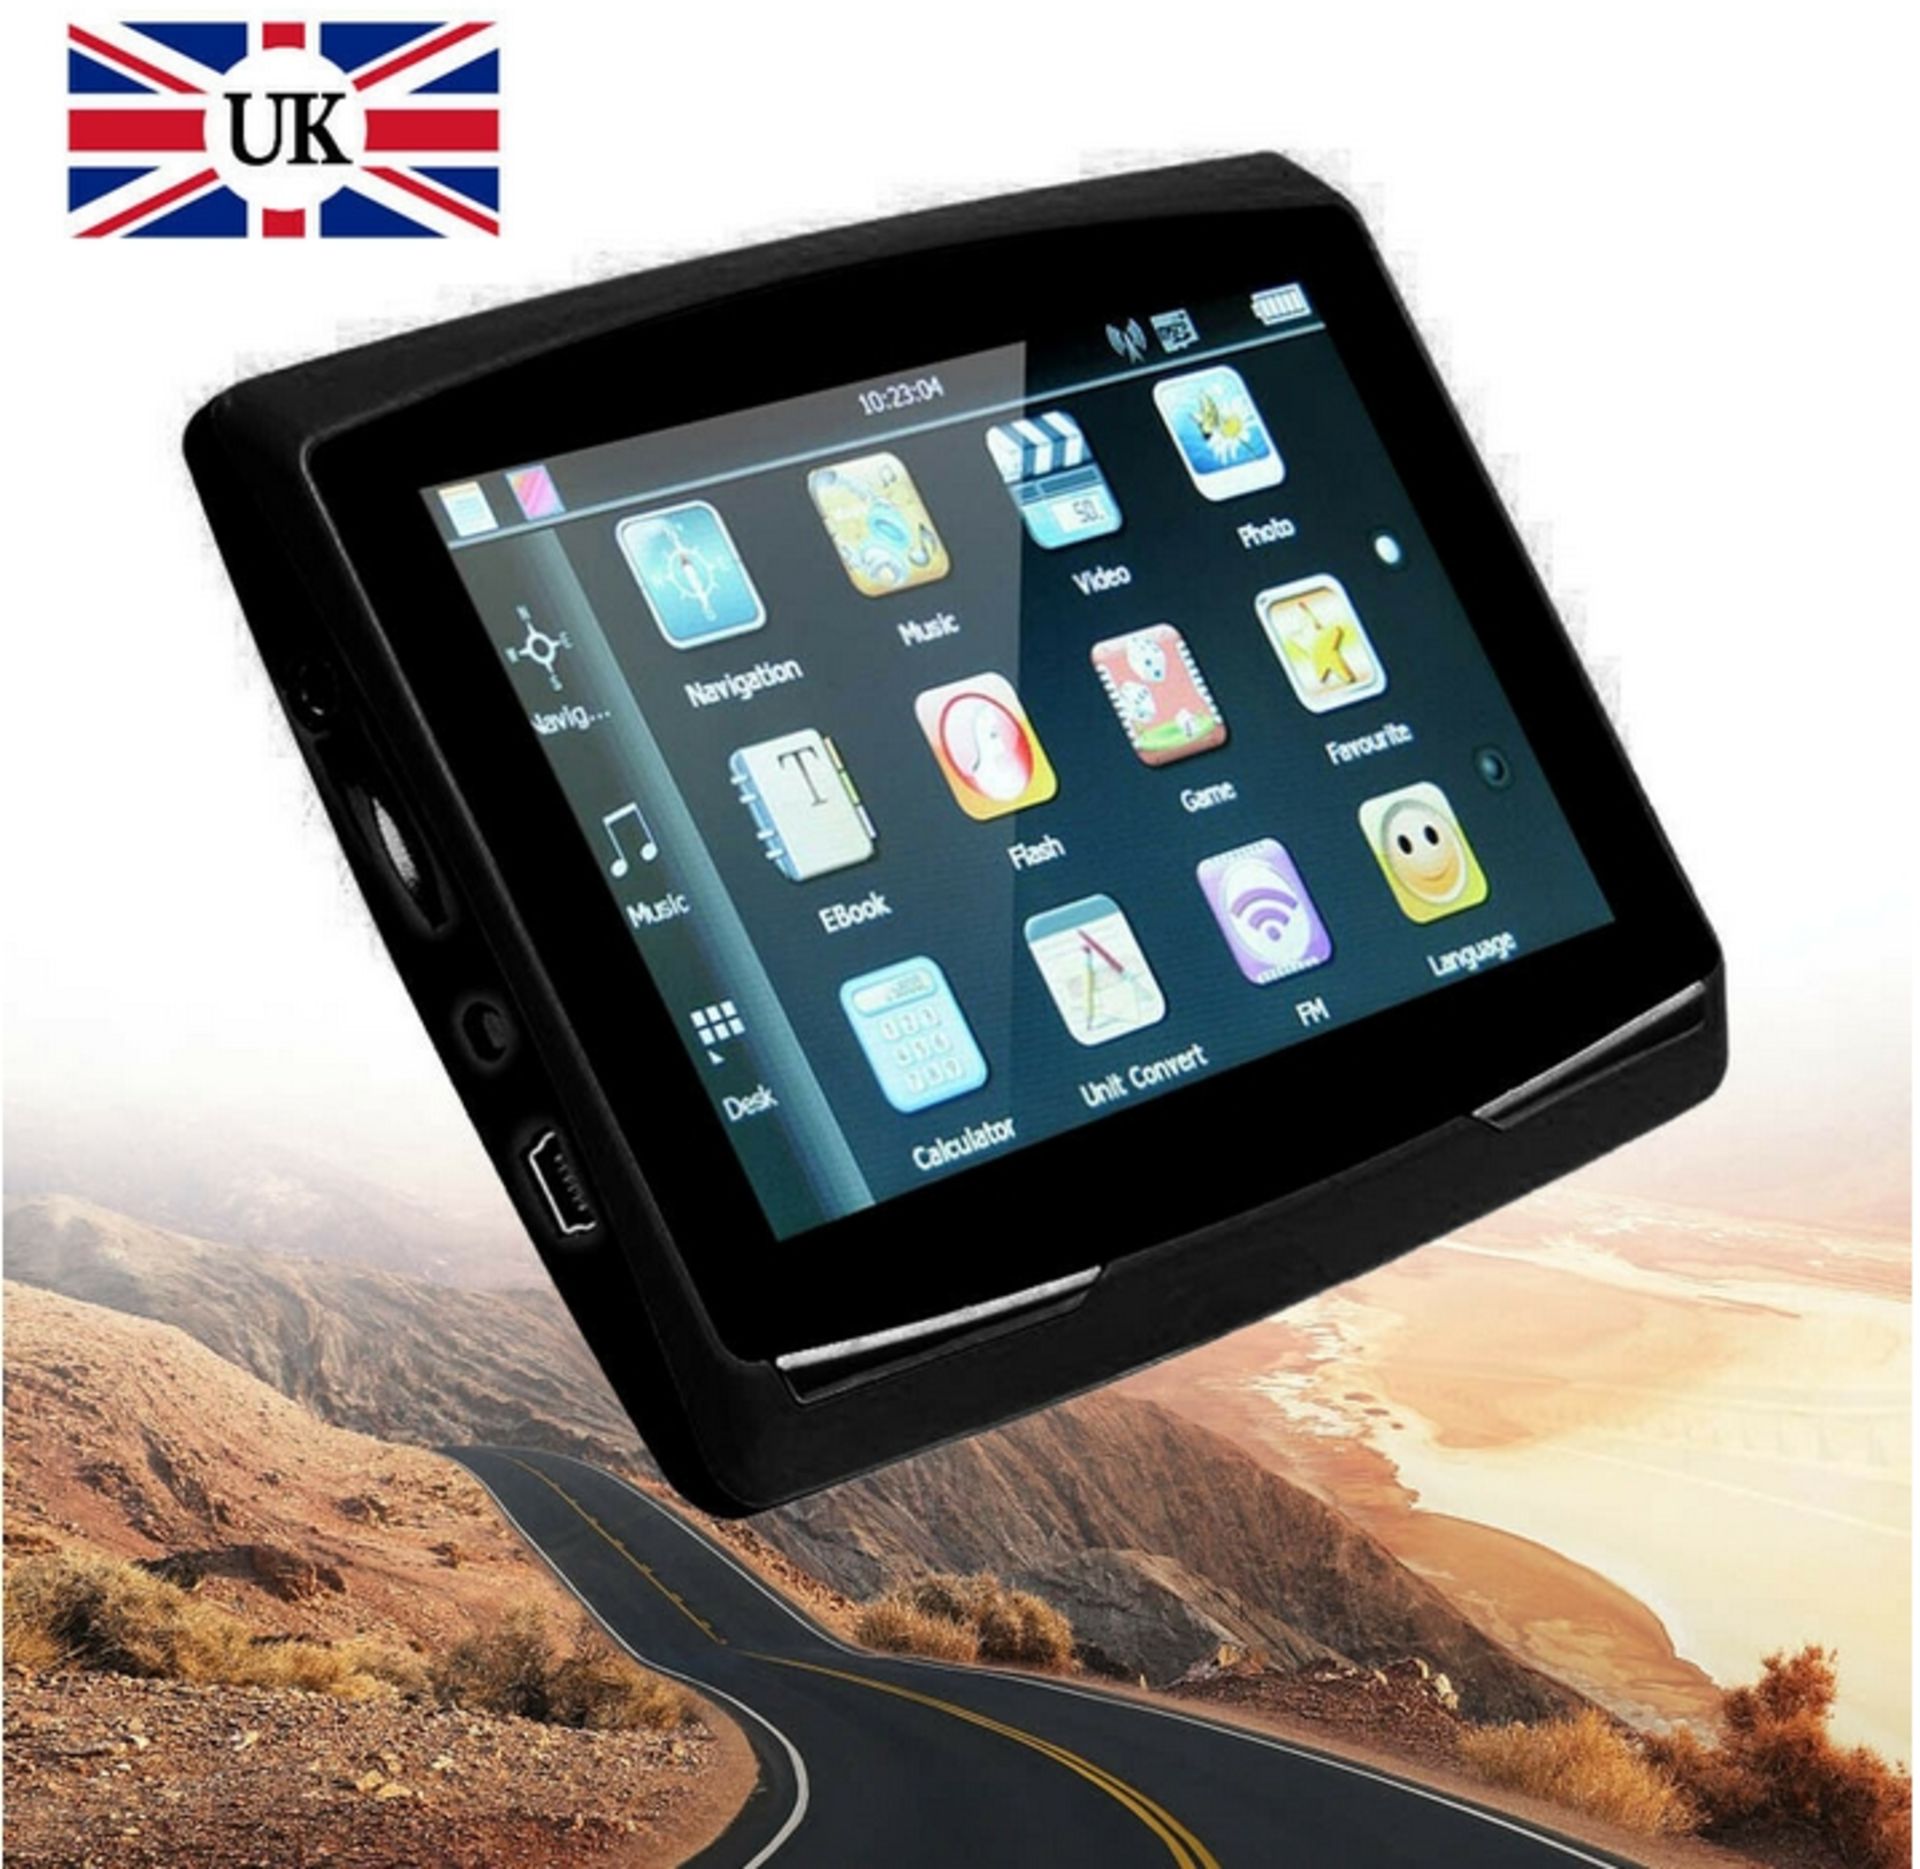 Sat Nav Multimedia System, Excellent Quality And Easy To Use. - Bild 2 aus 3